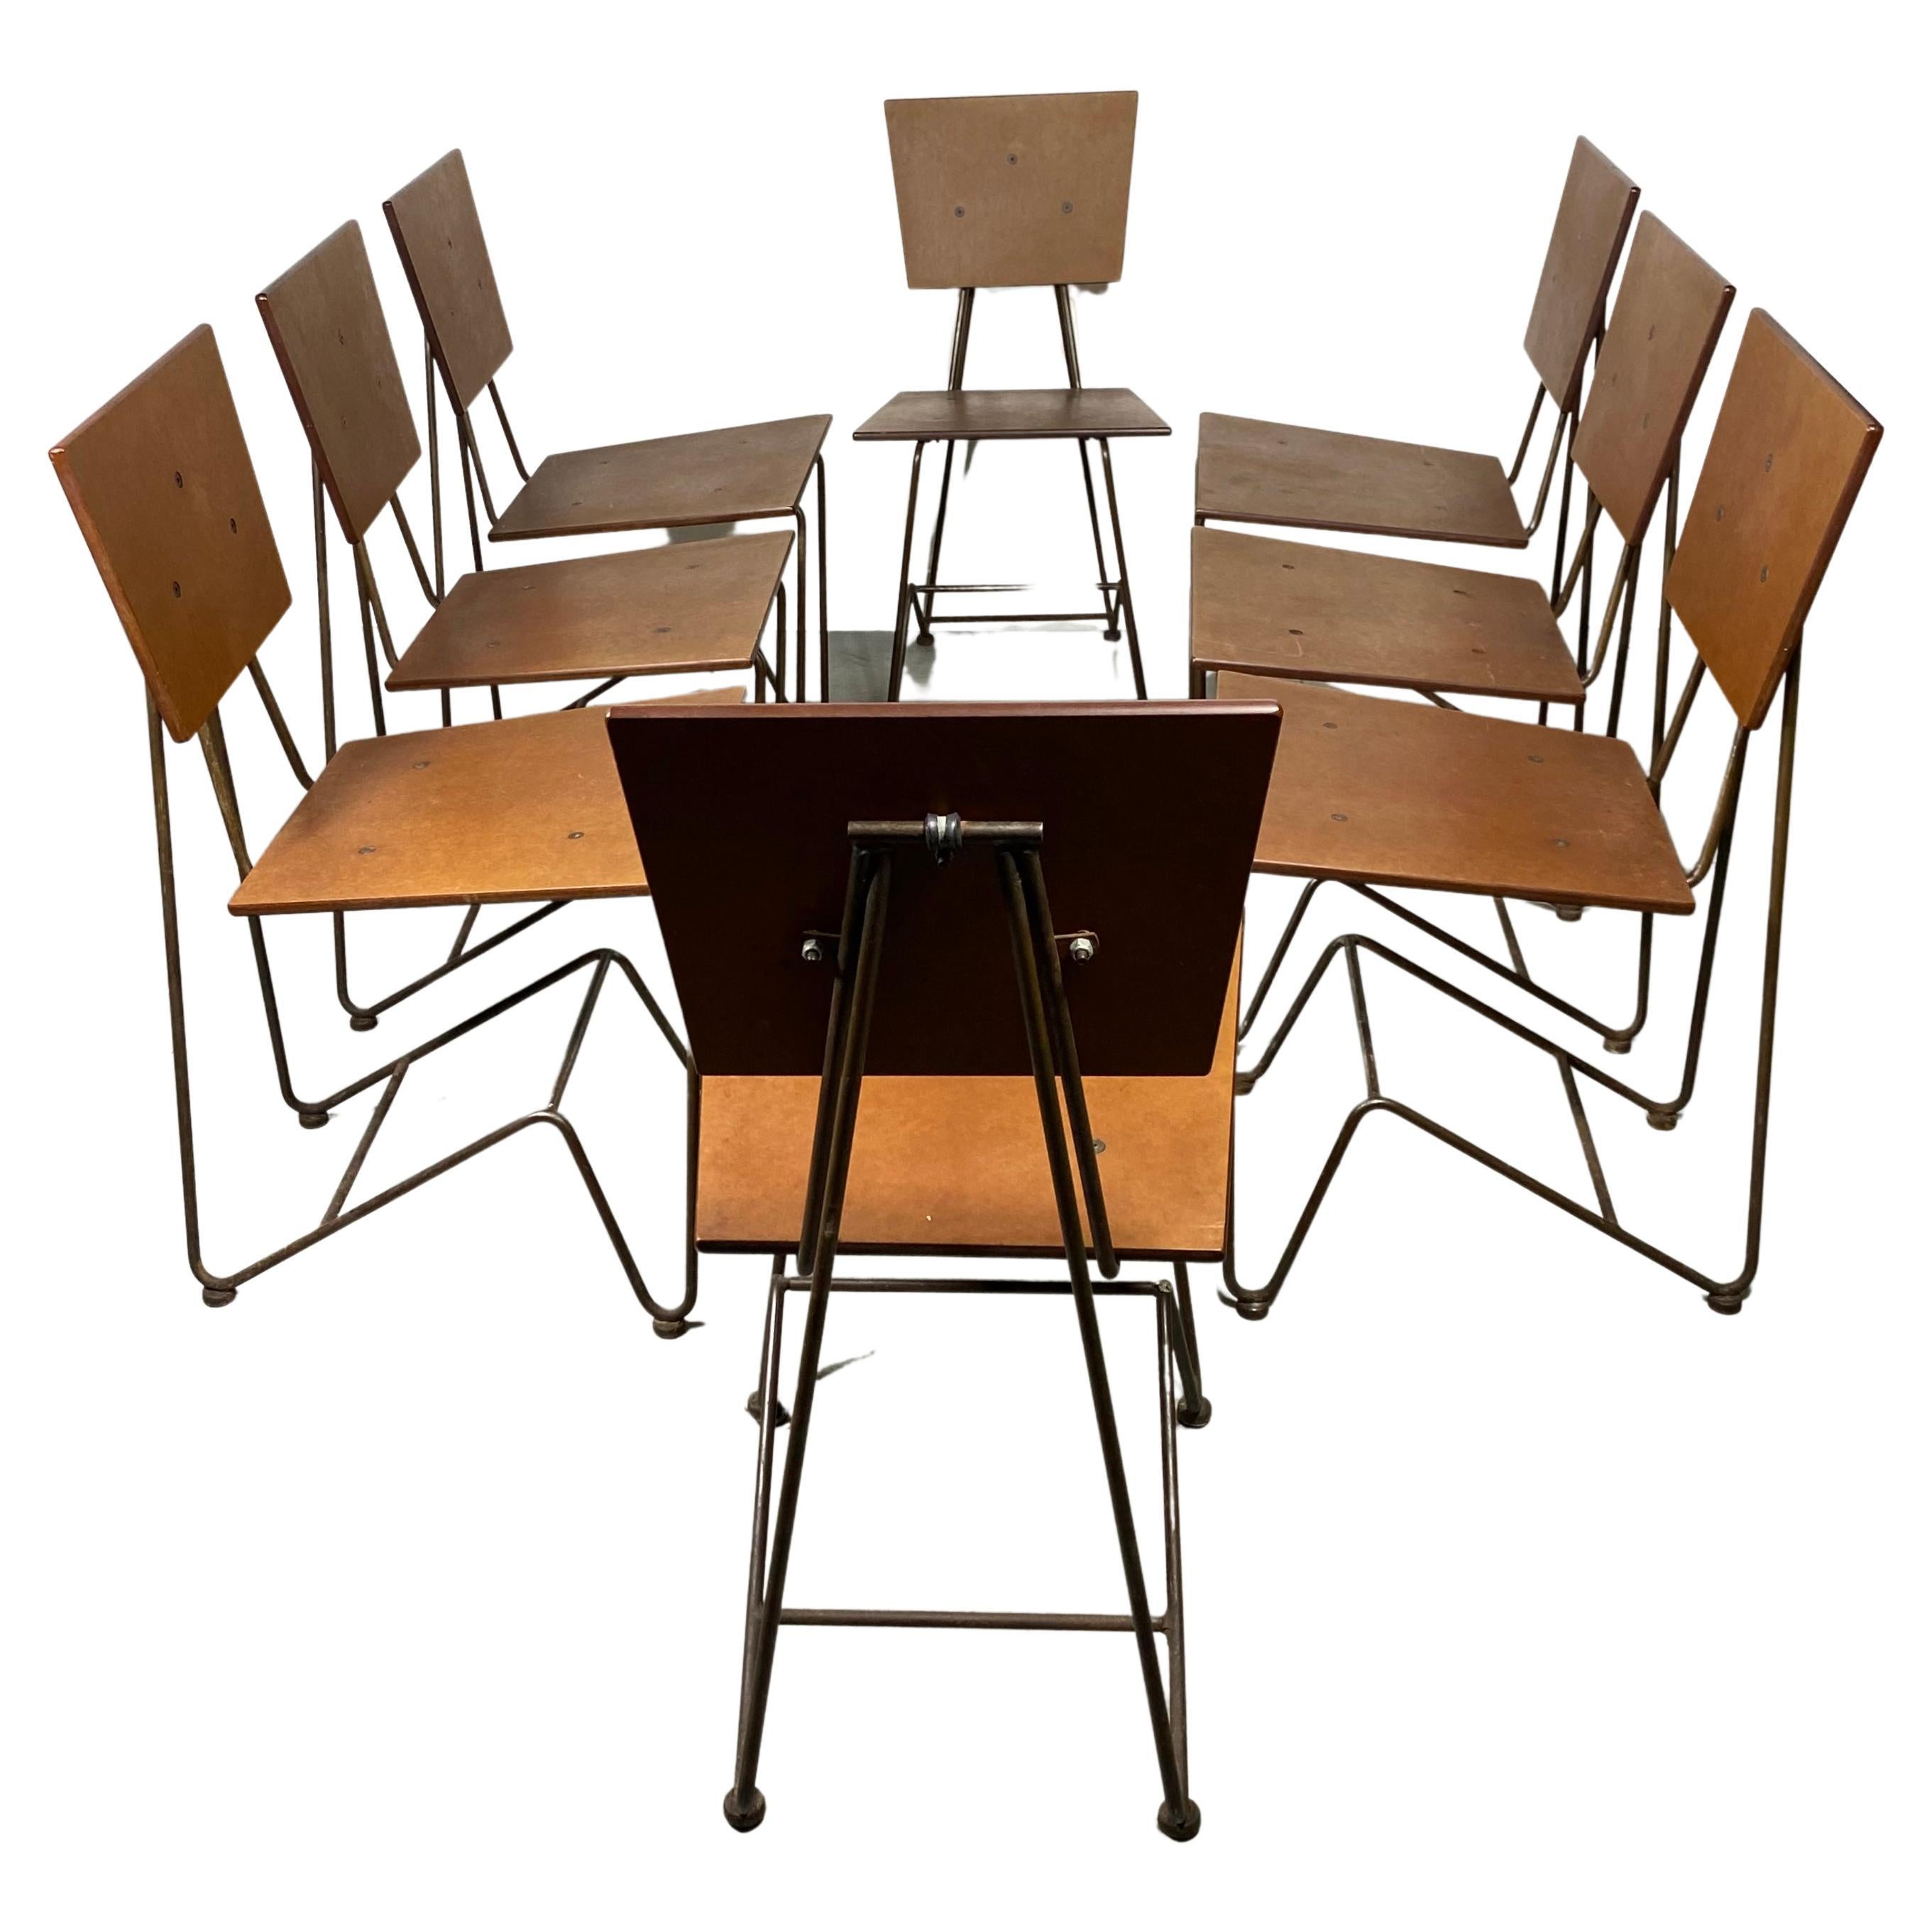 Set 8 Modernist Iron and Ply Dining Chairs Designed by Steve Sauer